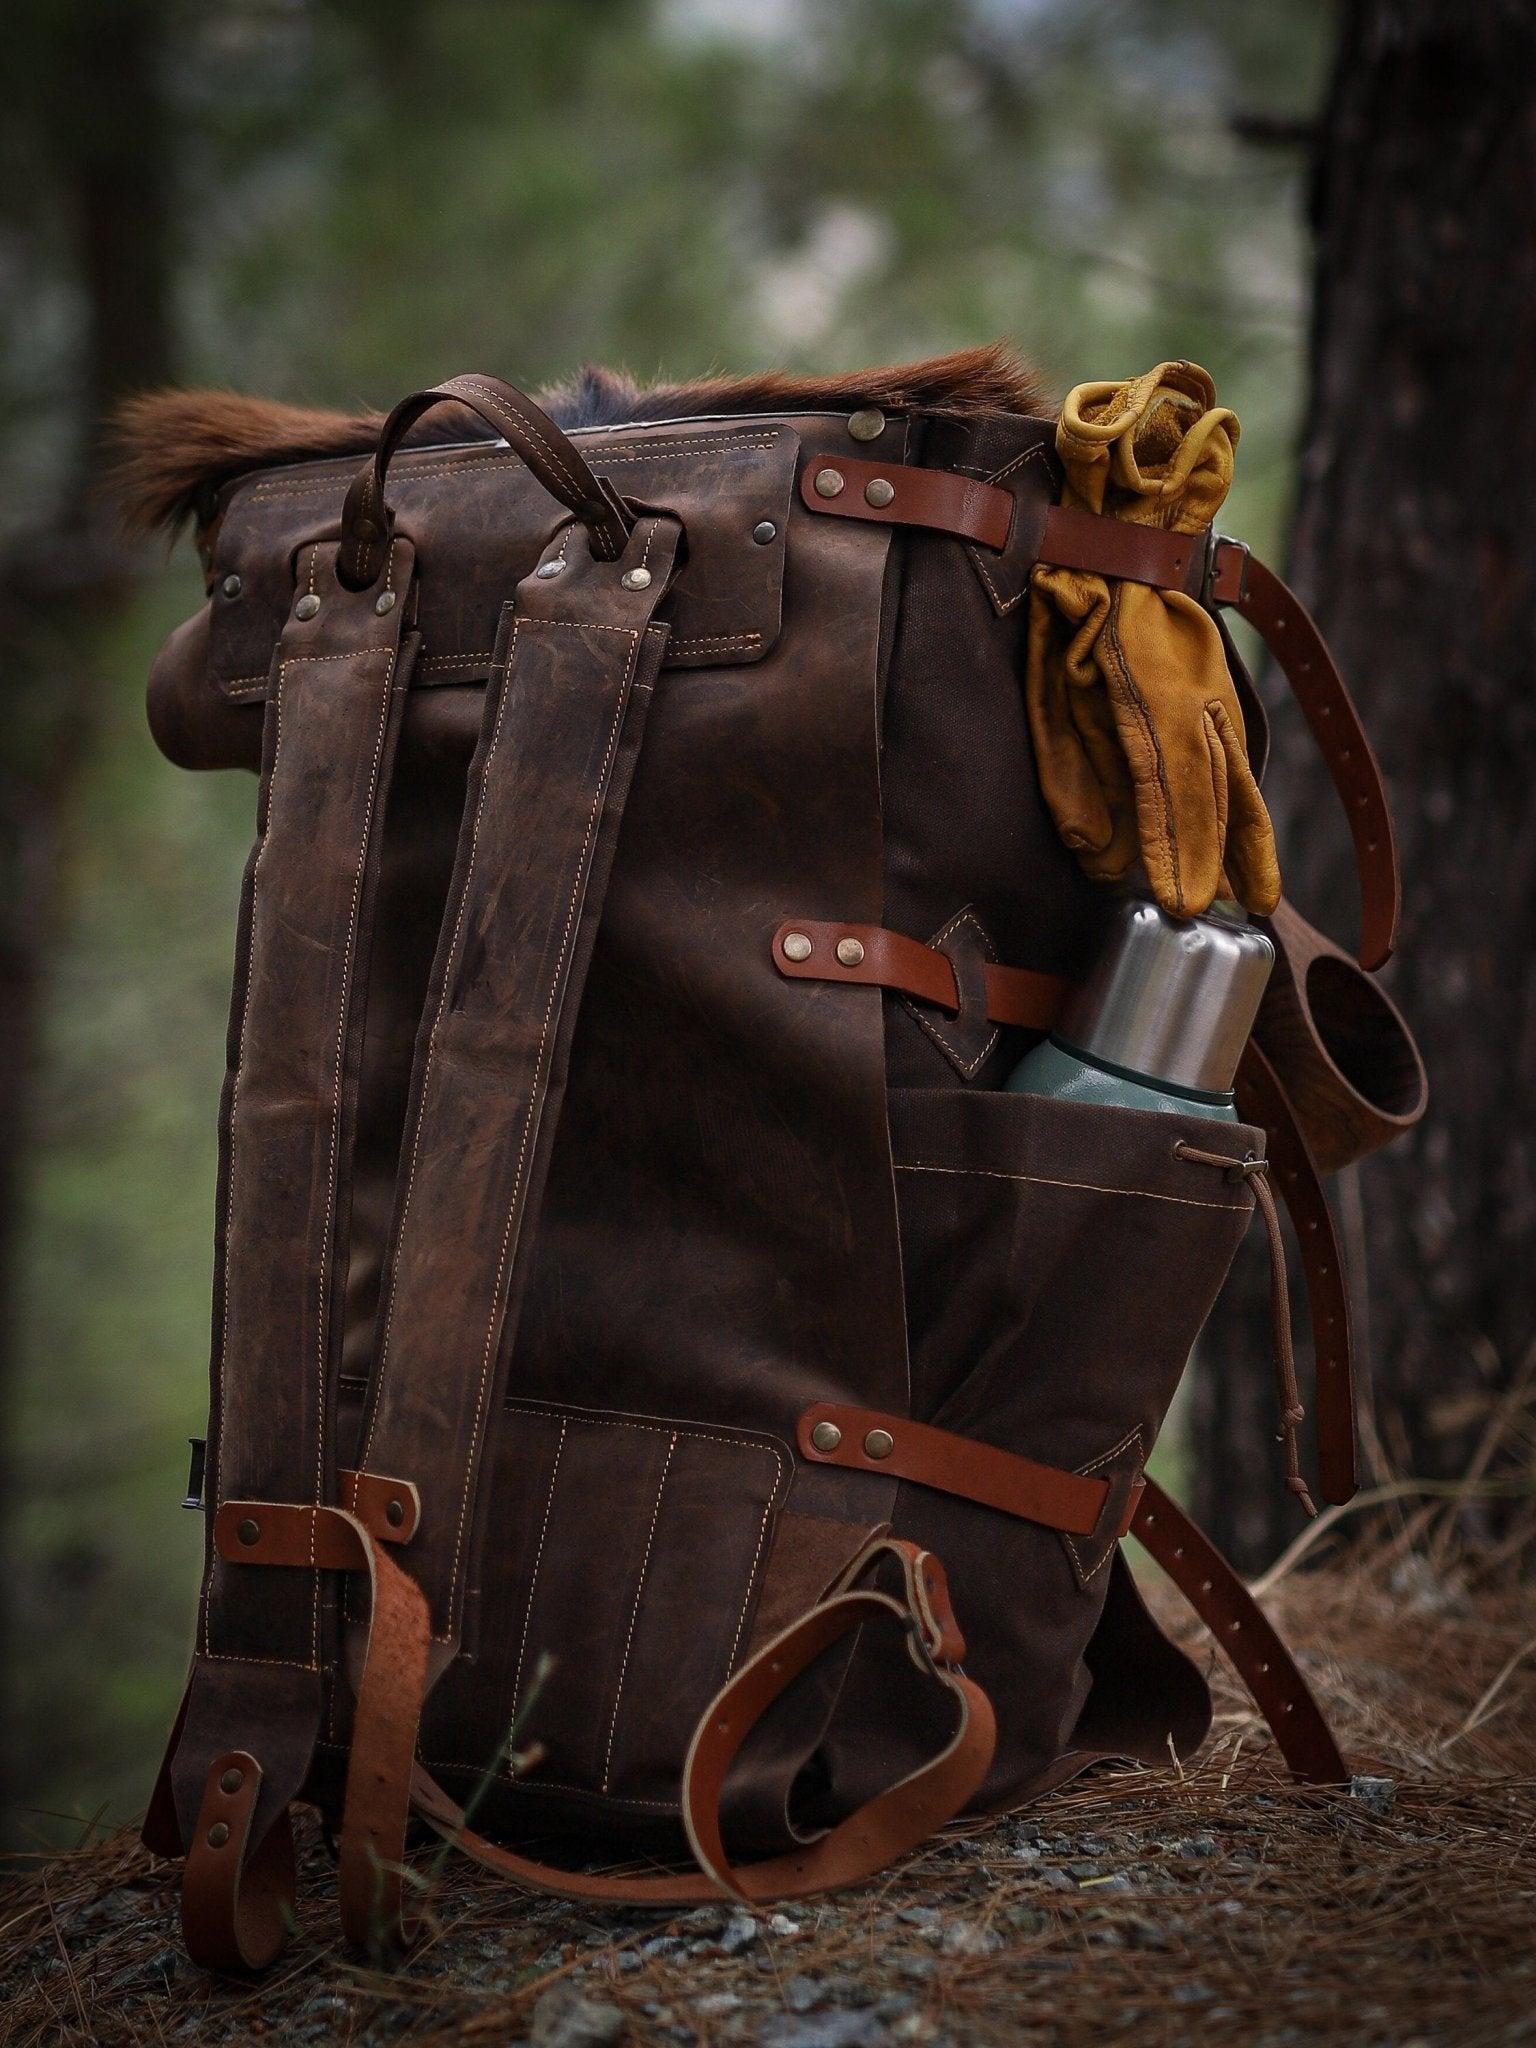 Camping Backpack | Camping Backpacks | Handmade Waxed Canvas and Leather Backpack for Travel, Camping, Hiking, Bushcraft | 30 liter to 80 liter bushcraft - camping - hiking backpack 99percenthandmade   